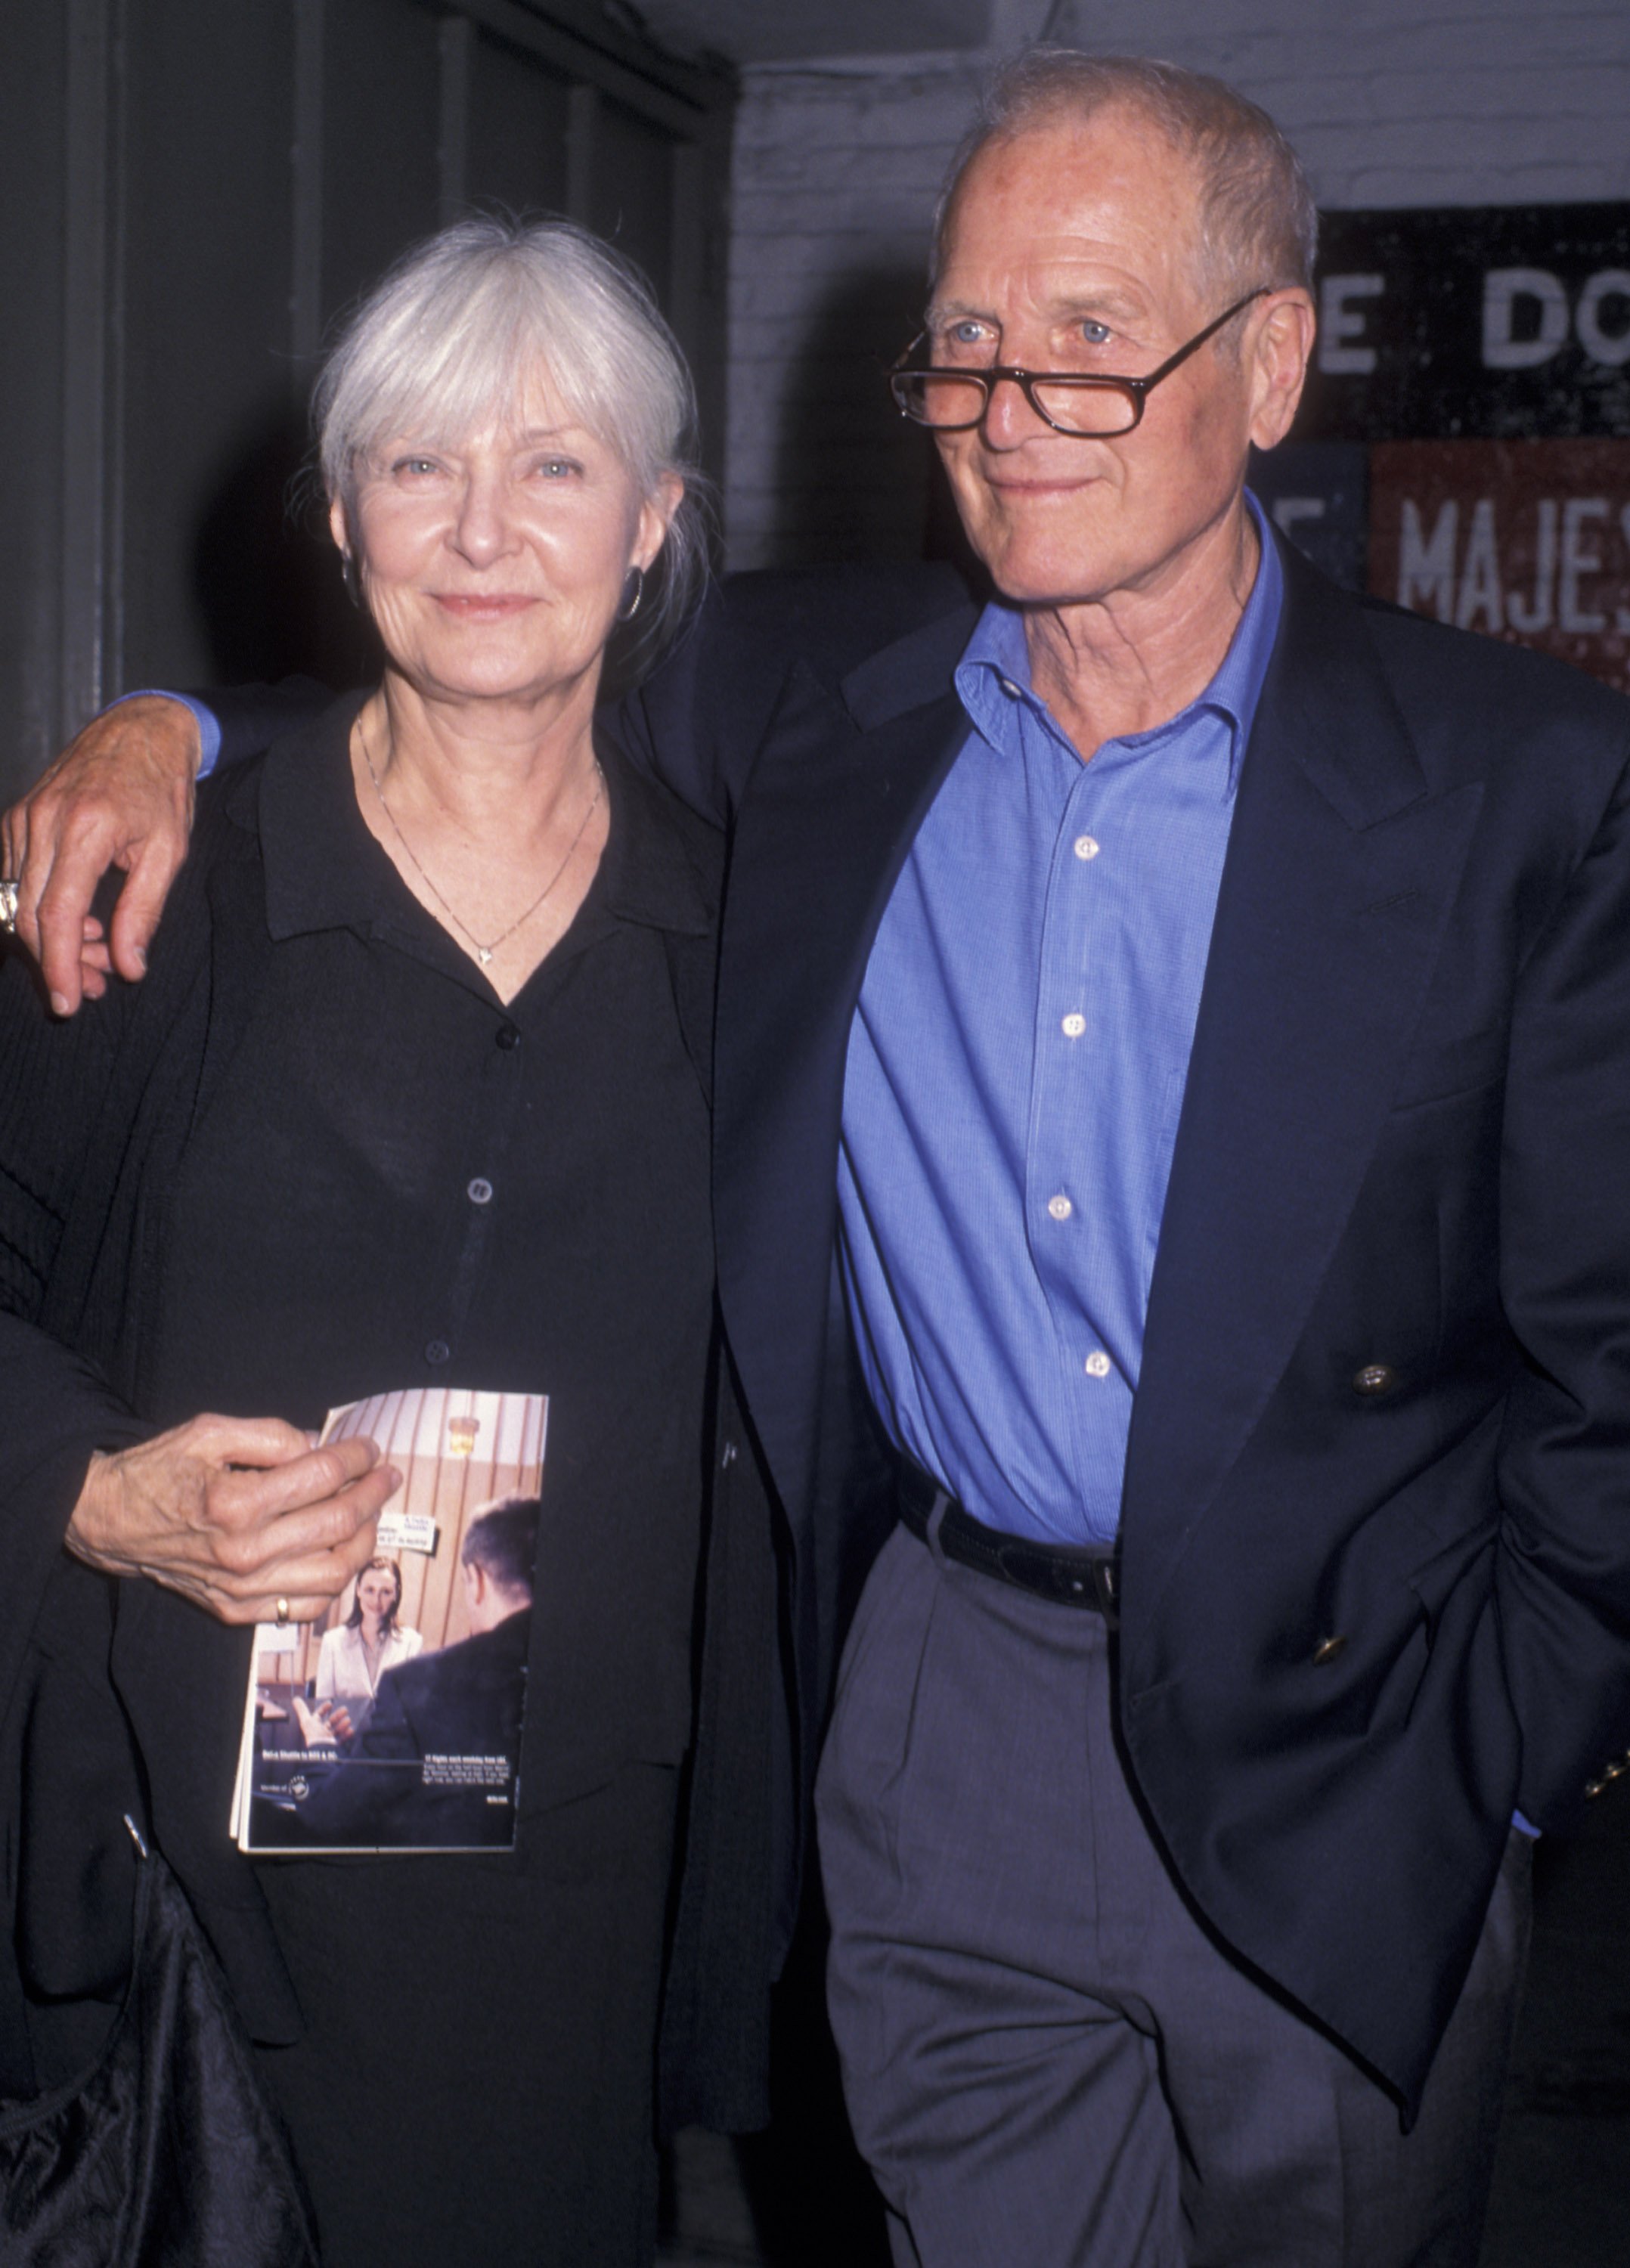 Joanne Woodward and Paul Newman at the performance of "Stones In His Pockets" on September 4, 2001, in New York City. | Source: Getty Images